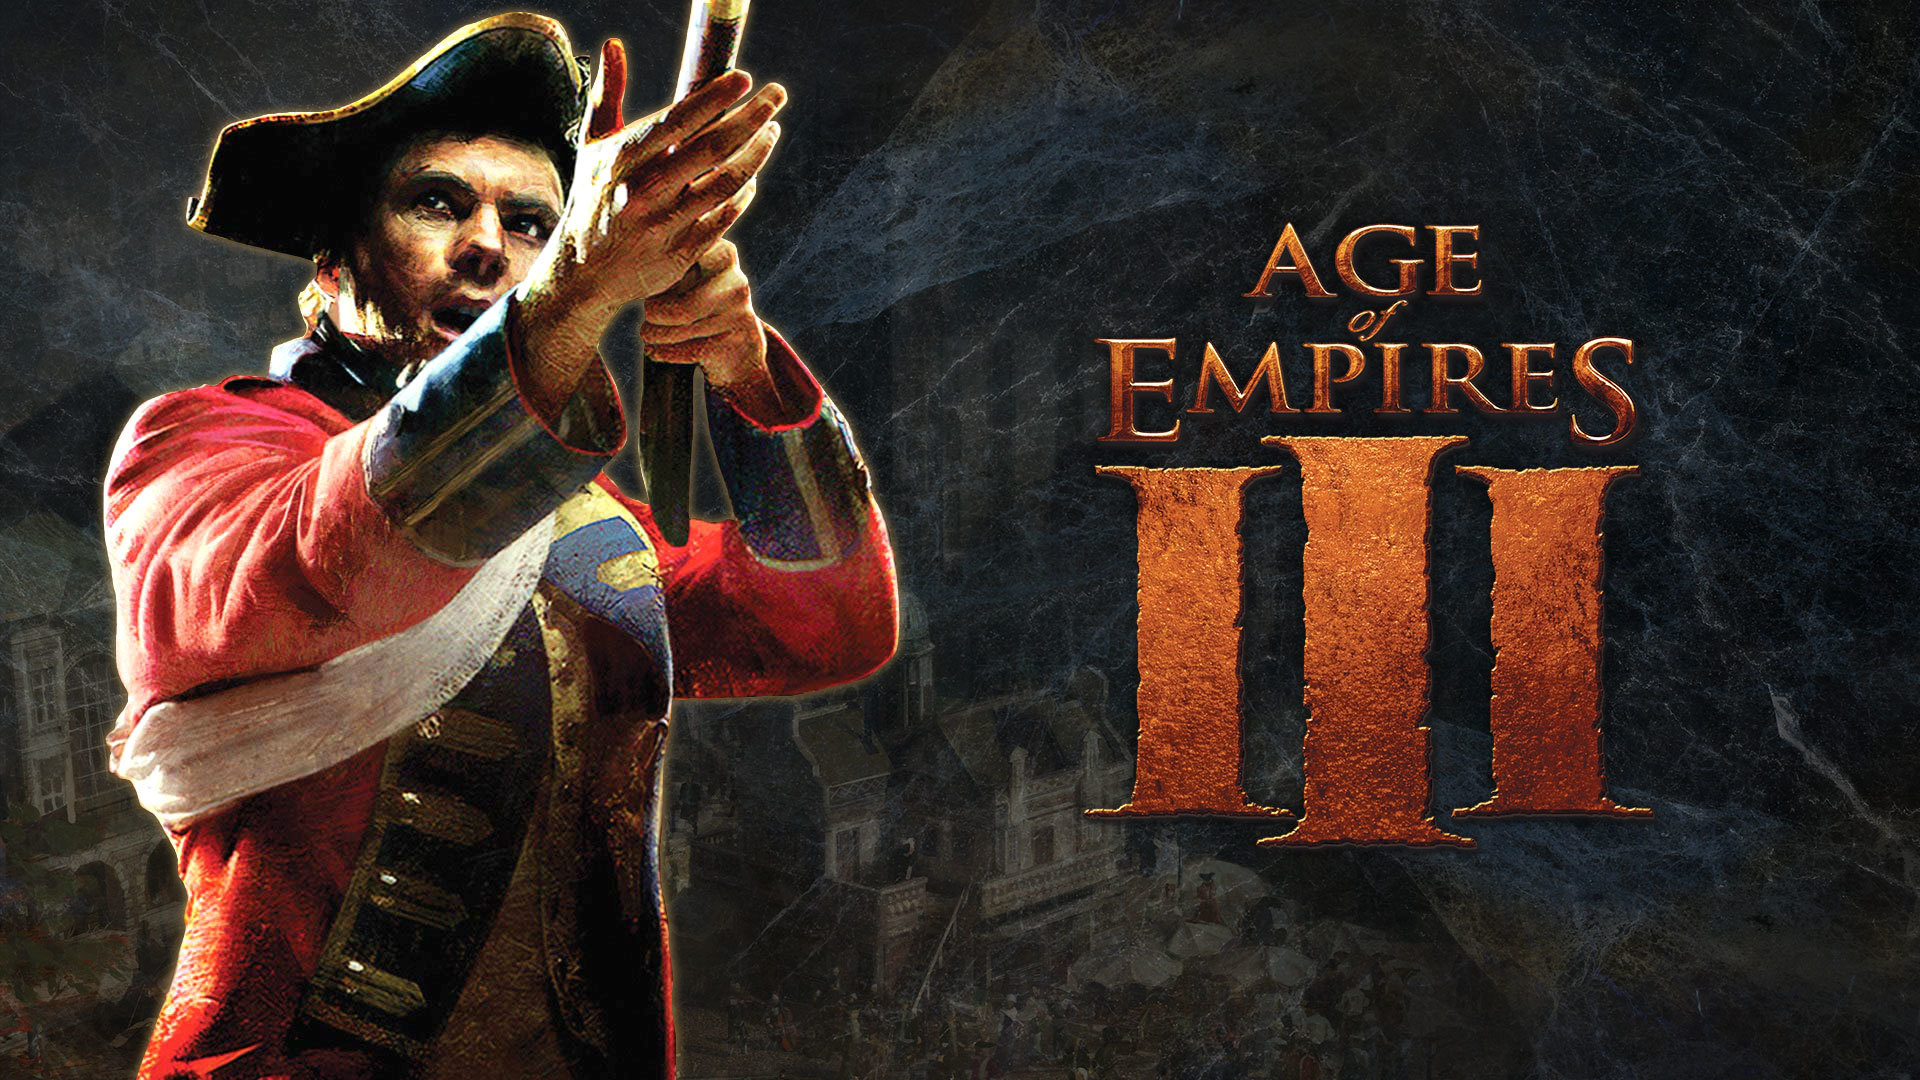 Age empires definitive steam фото 106